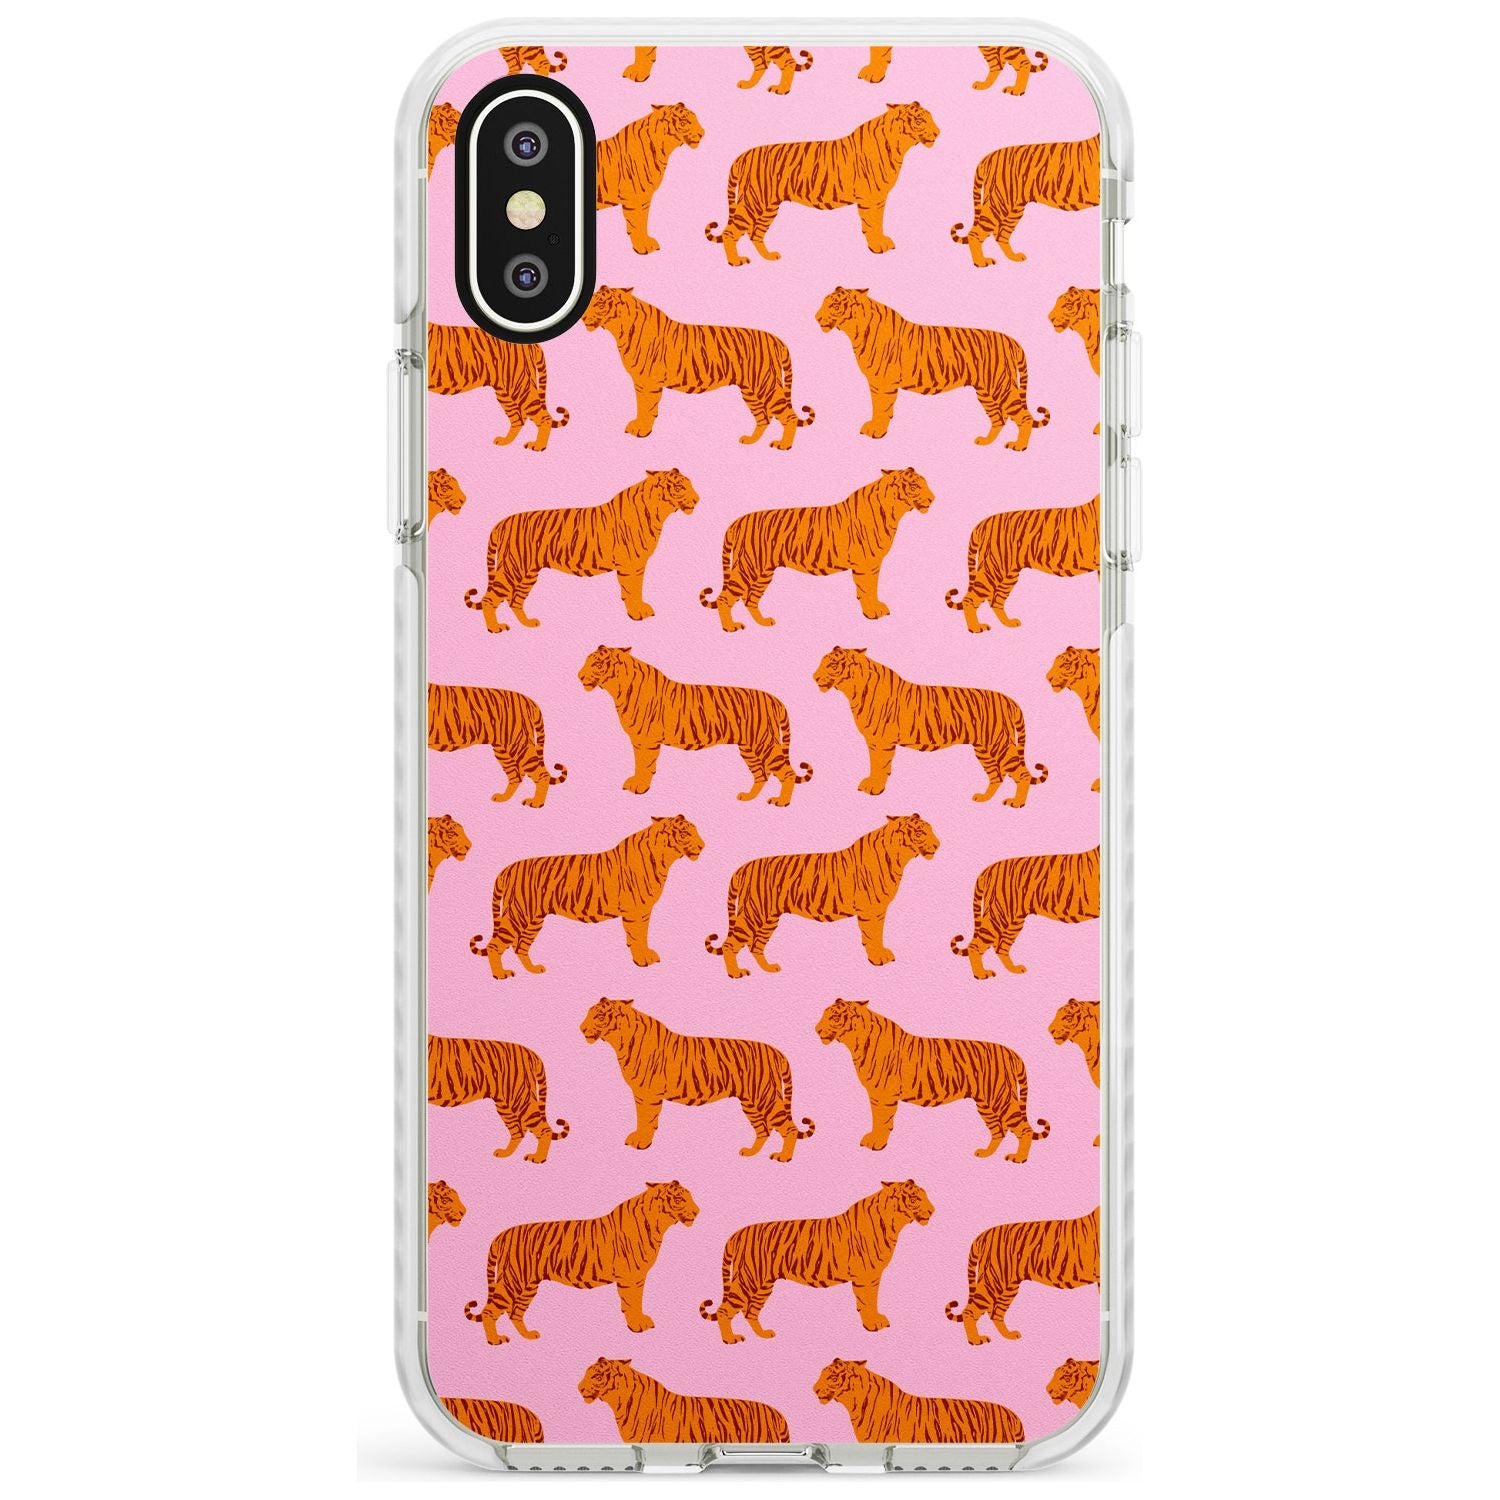 Tigers on Pink Pattern Impact Phone Case for iPhone X XS Max XR